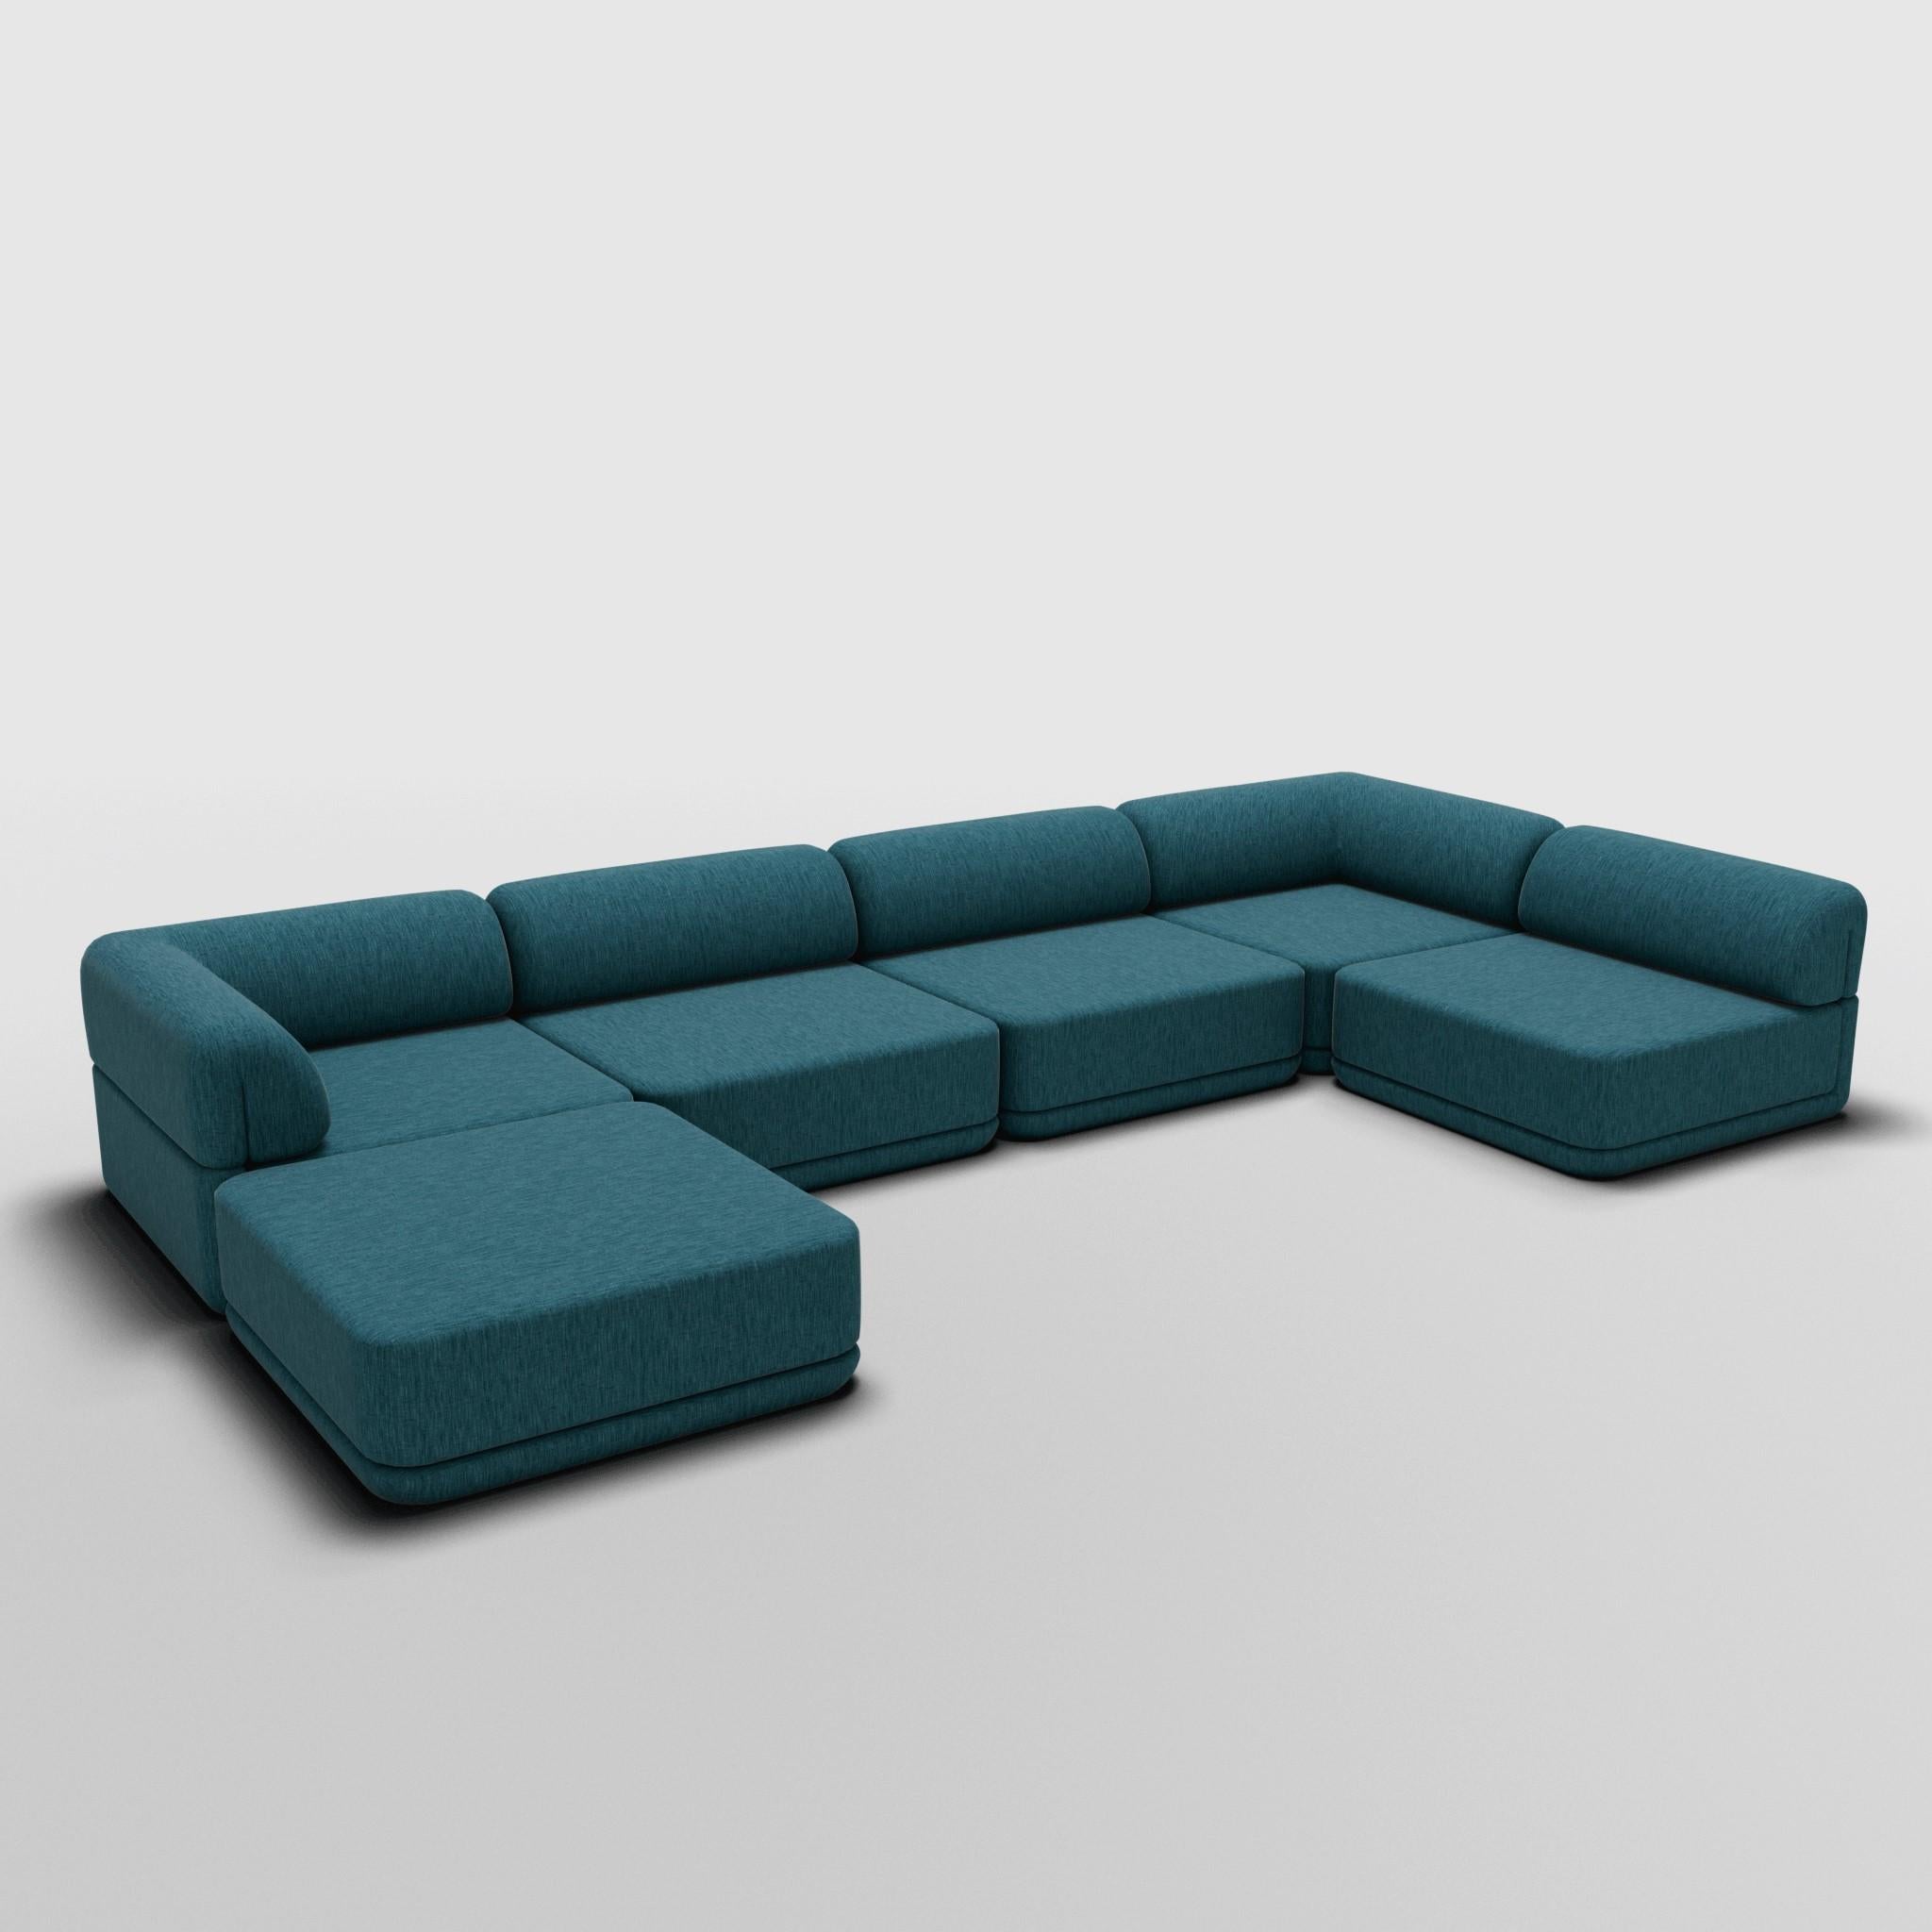 Contemporary The Cube Sofa - Low Lounge Sectional For Sale